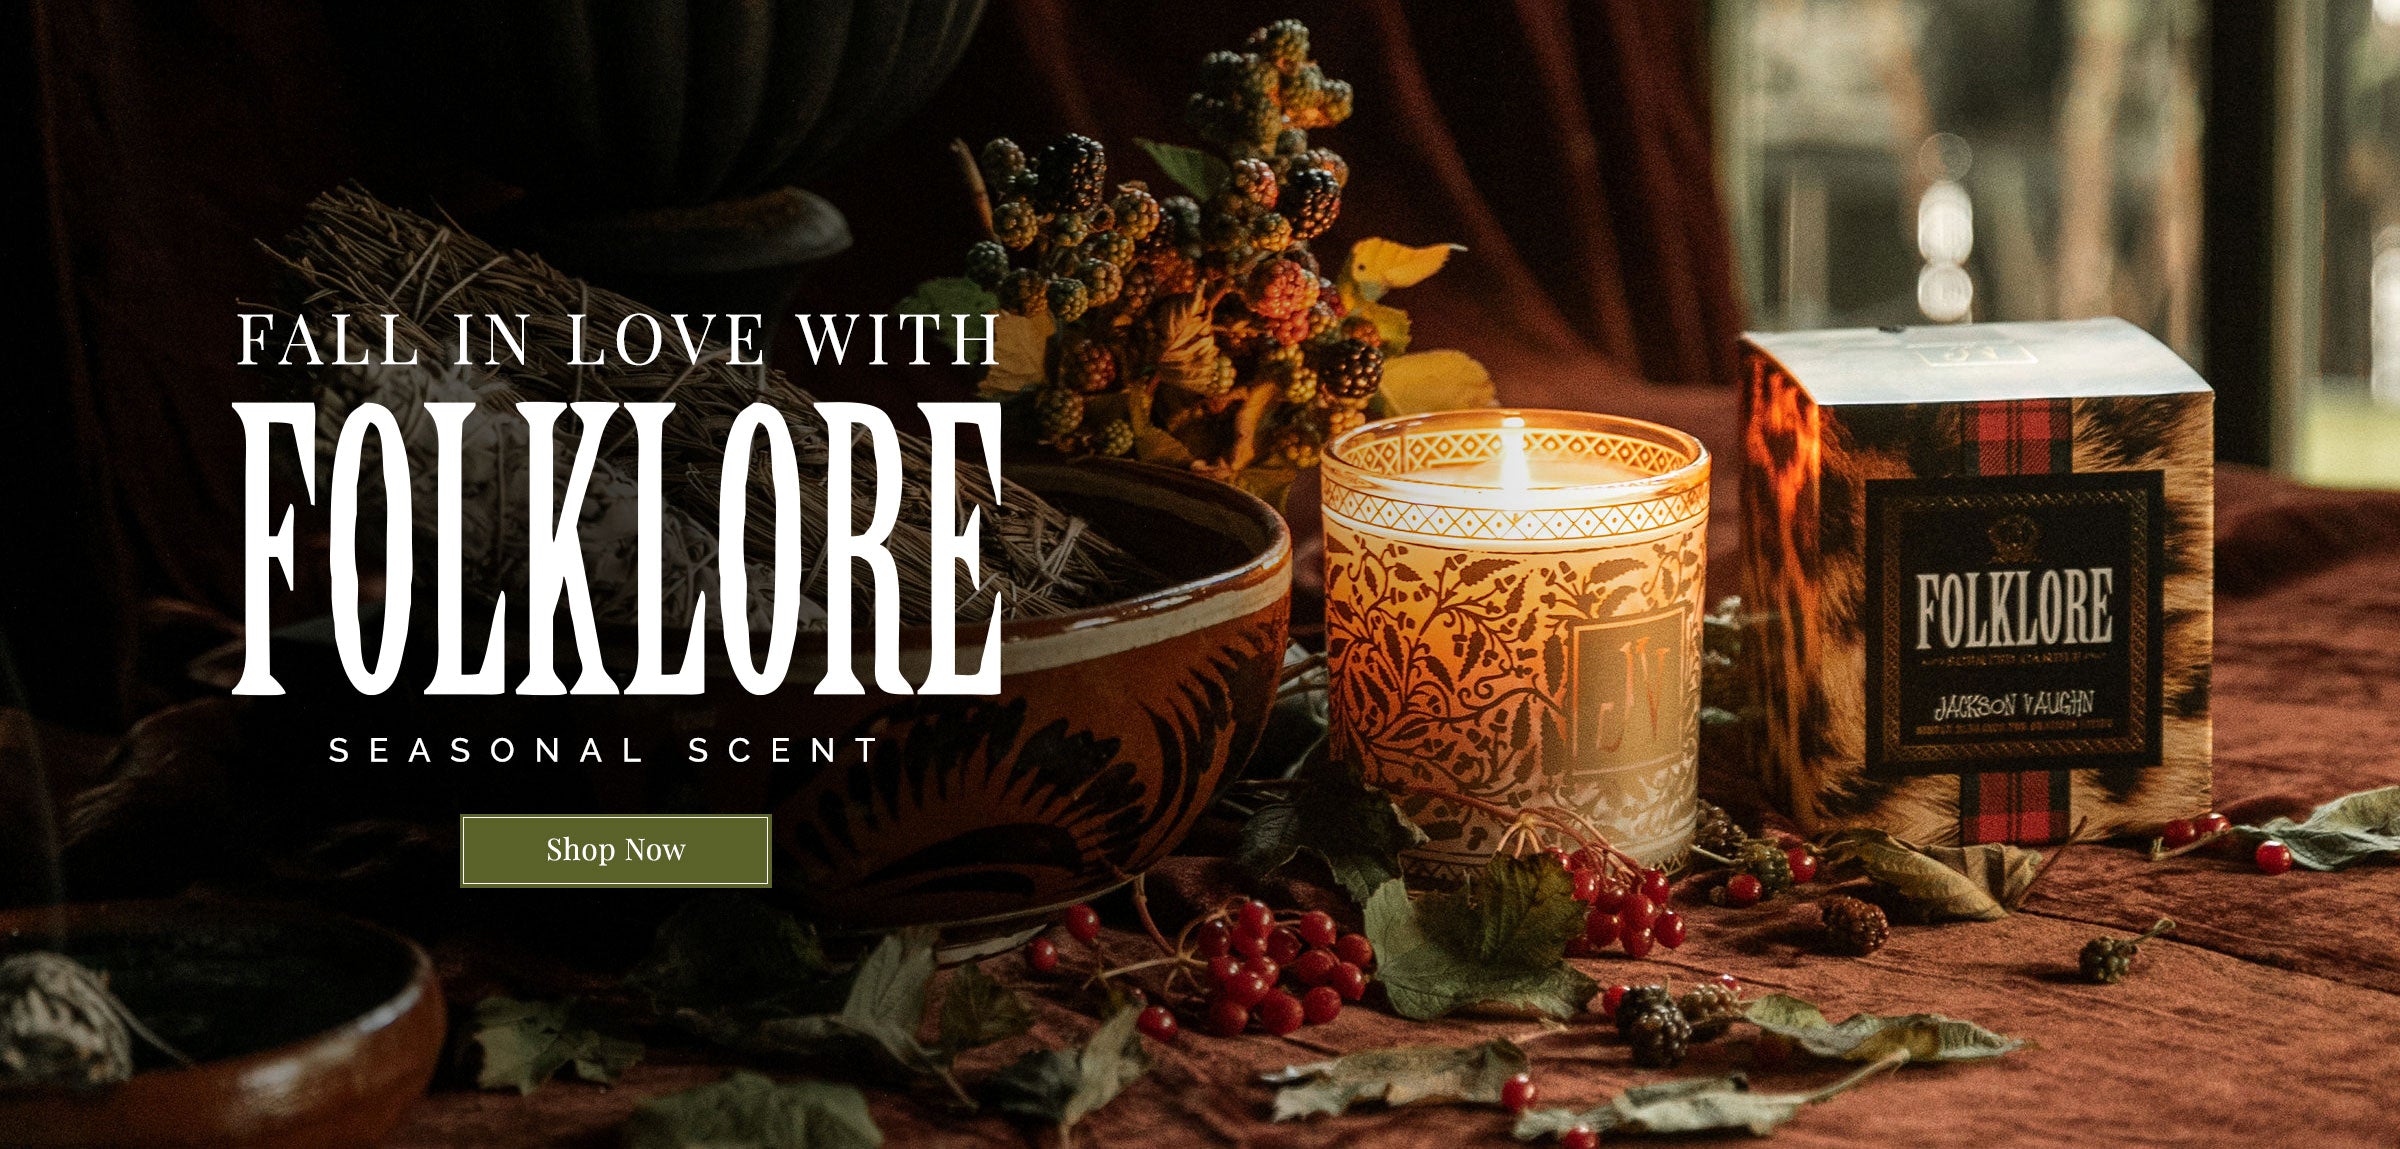 Fall In Love With Folklore Seasonal Scent